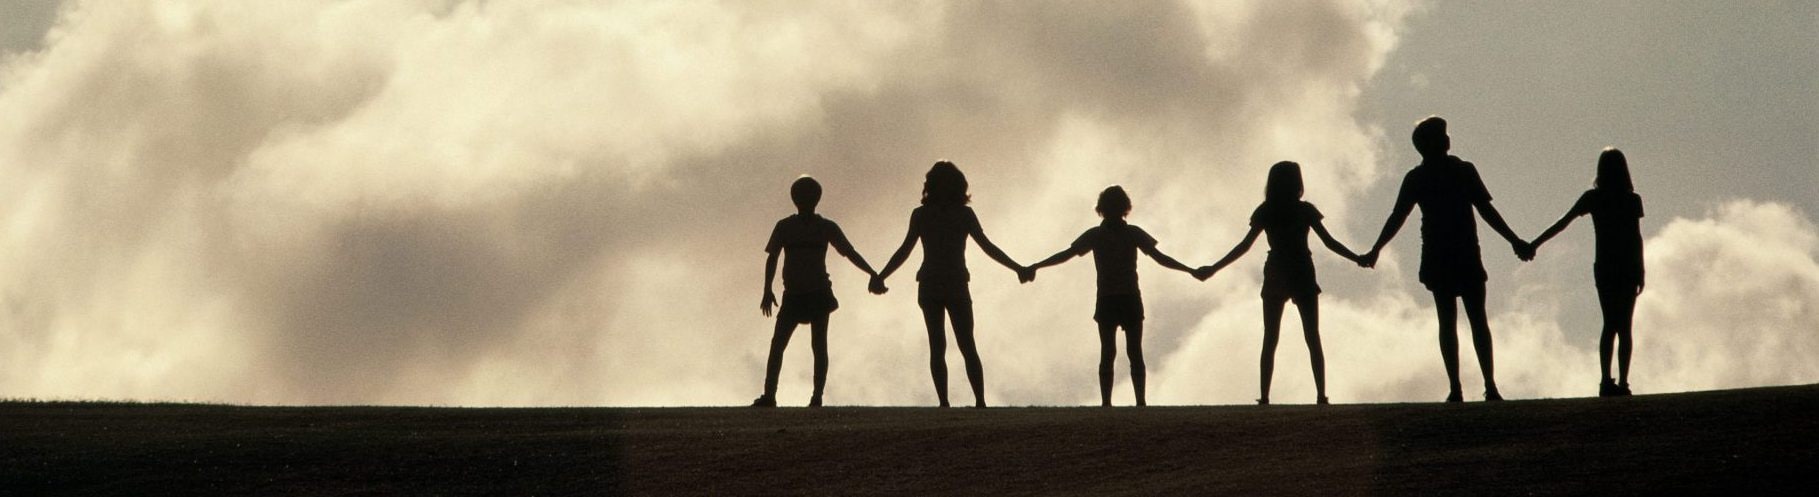 silhouette of family holding hands on top of a hill